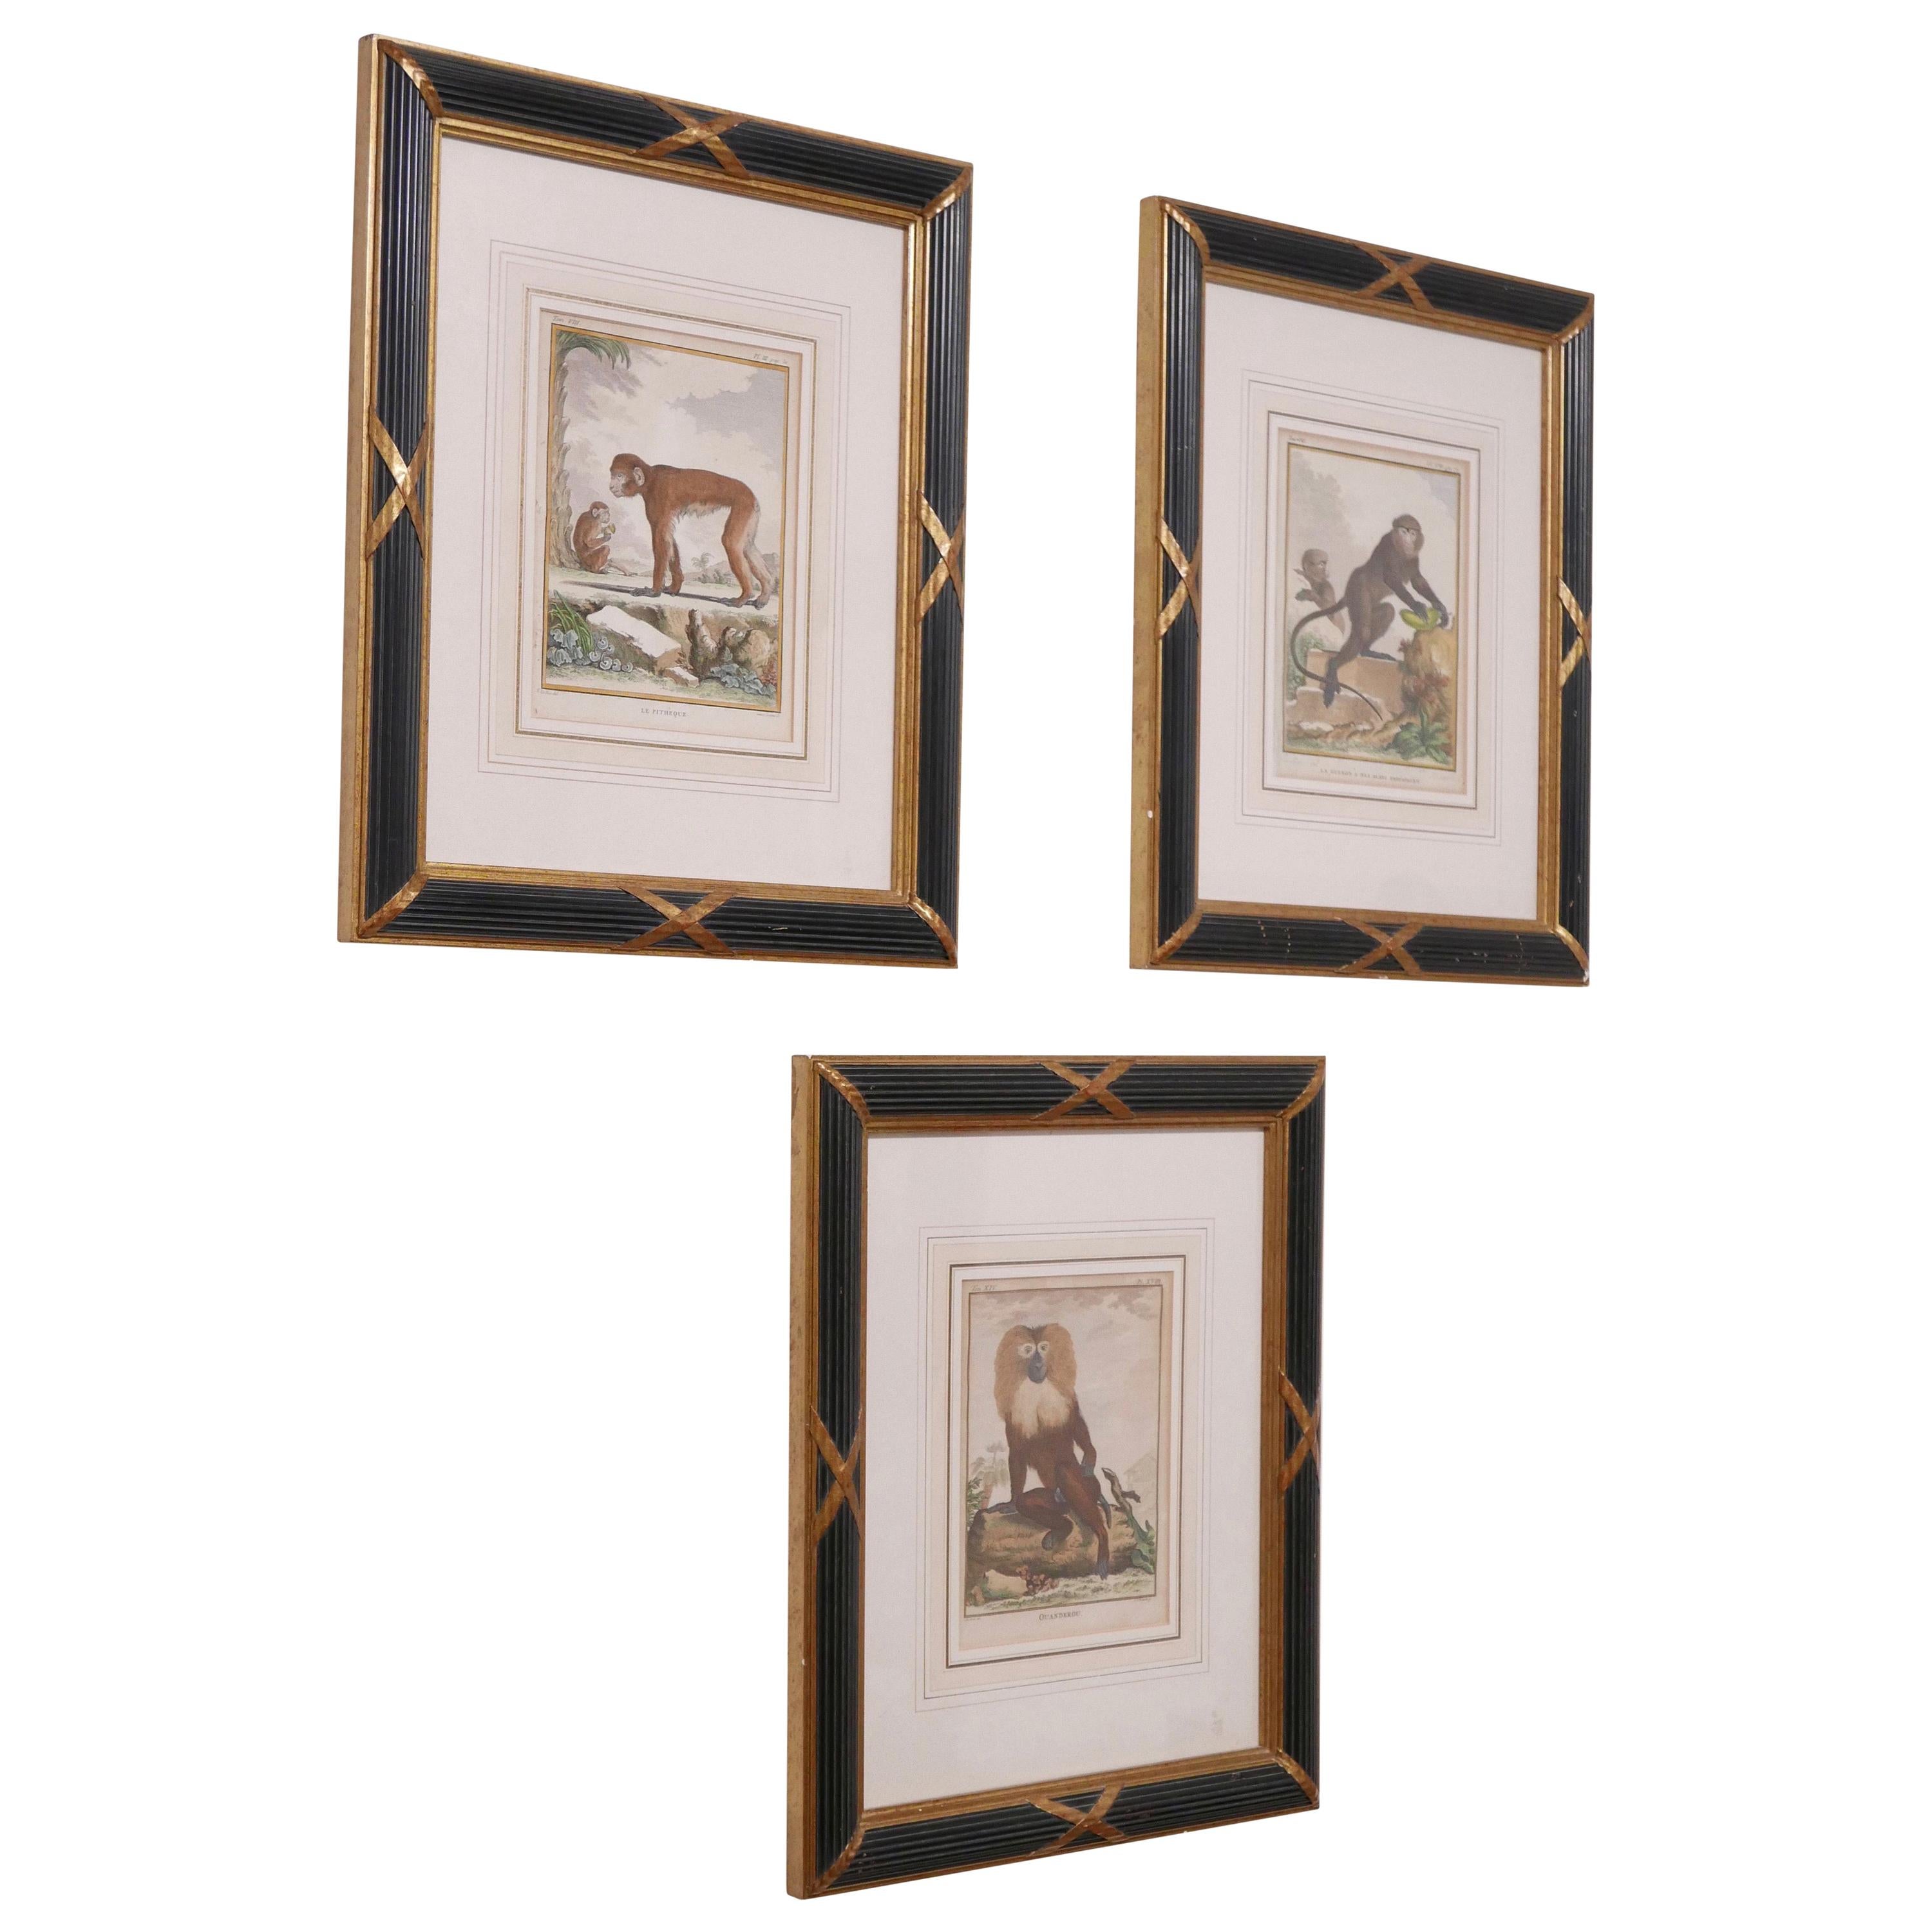 Three Framed Antique Hand Colored Monkey Engravings - Early 19th Century